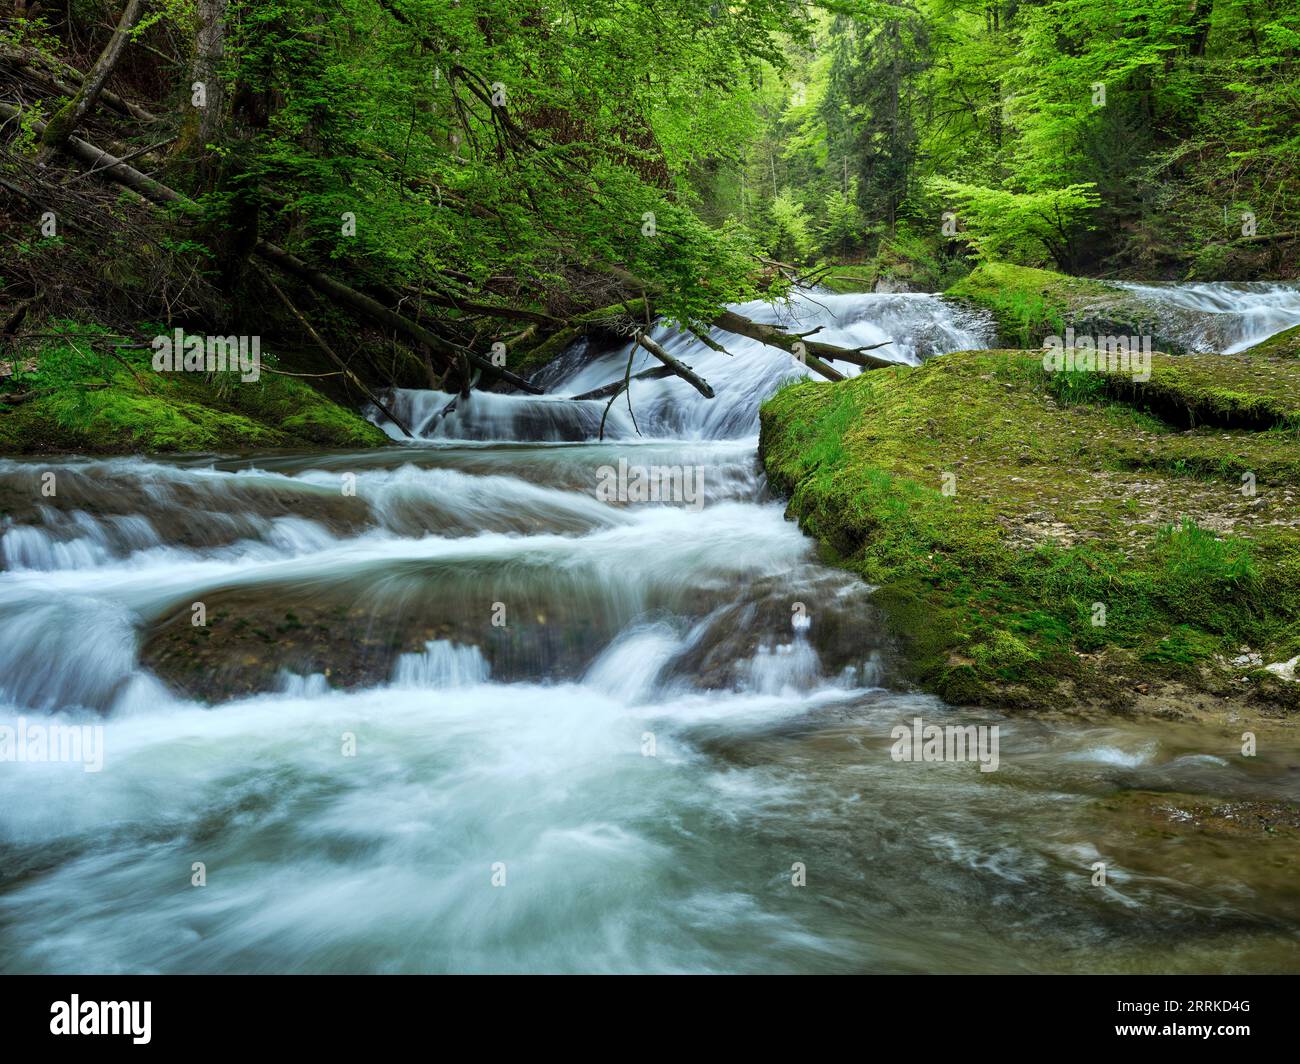 Geotope, nature reserve, NSG, FFH, FFH area, nature, river, water, river bank, waterfall, ice age, ravine, canyon, gorge, mountain forest, mountain, Alps, Allgäu, river landscape, mountain landscape Stock Photo